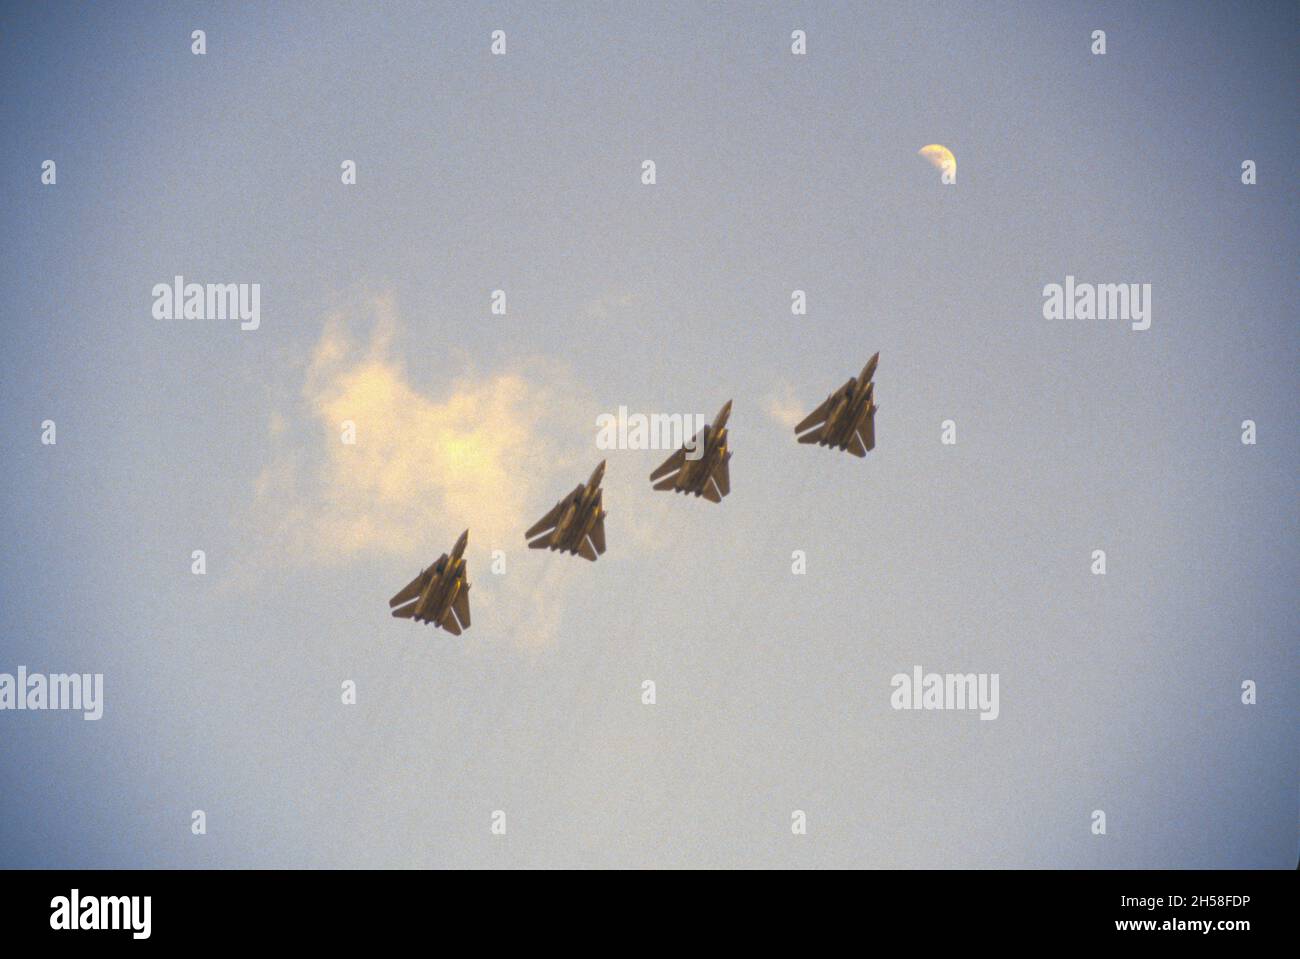 F-14 Tomcat four-ship formation set up for carrier break at NAS Miramar, San Diego, California. Stock Photo